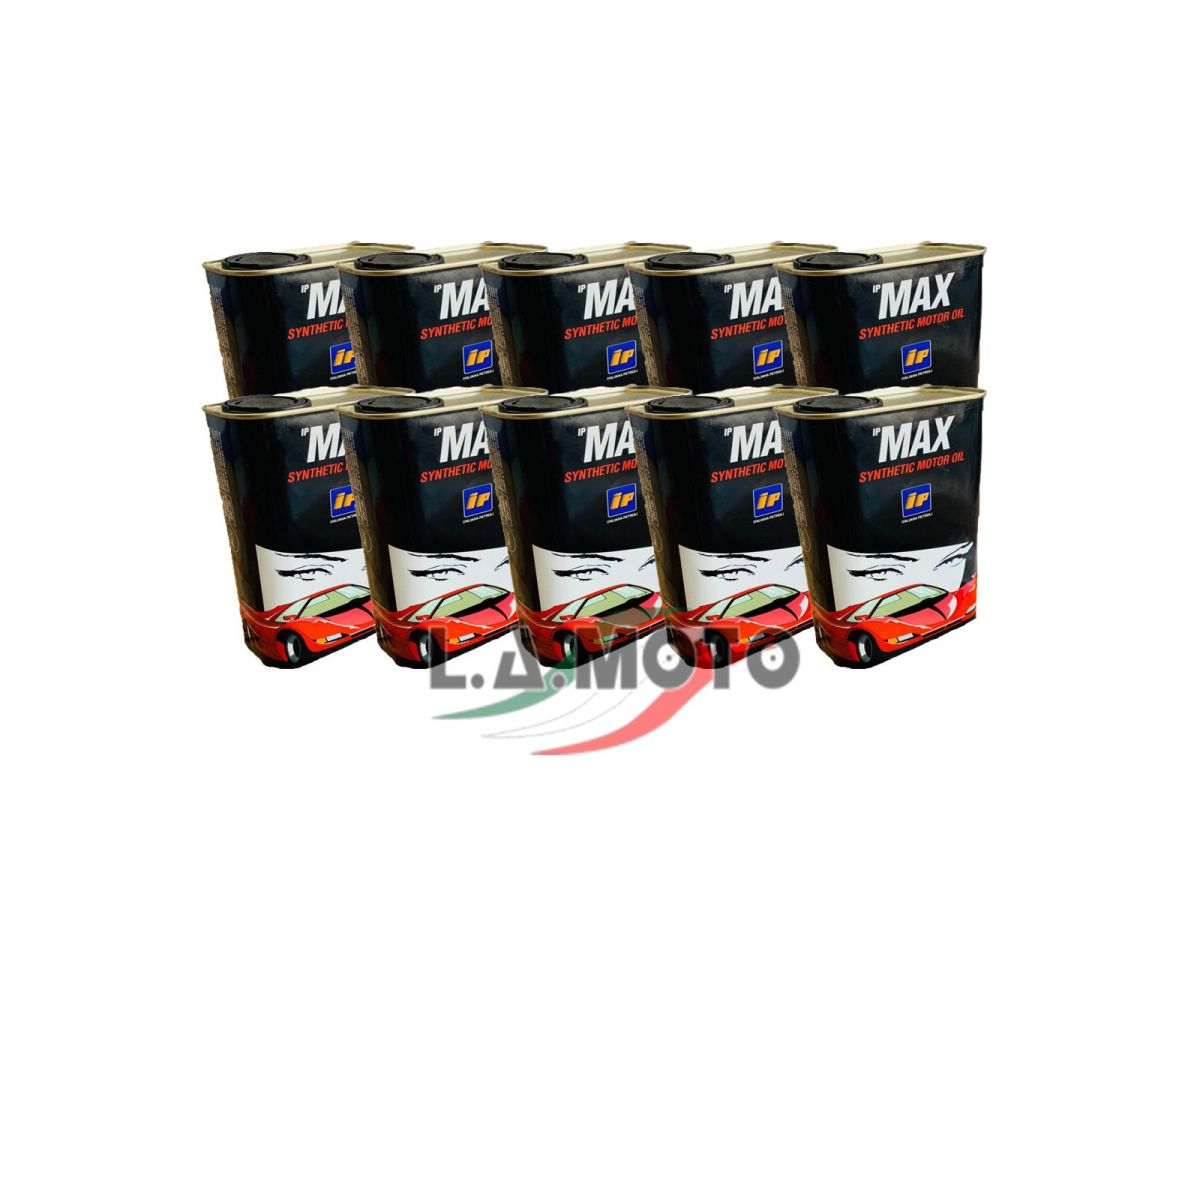 Synthetic motor oil IP MAX 10L